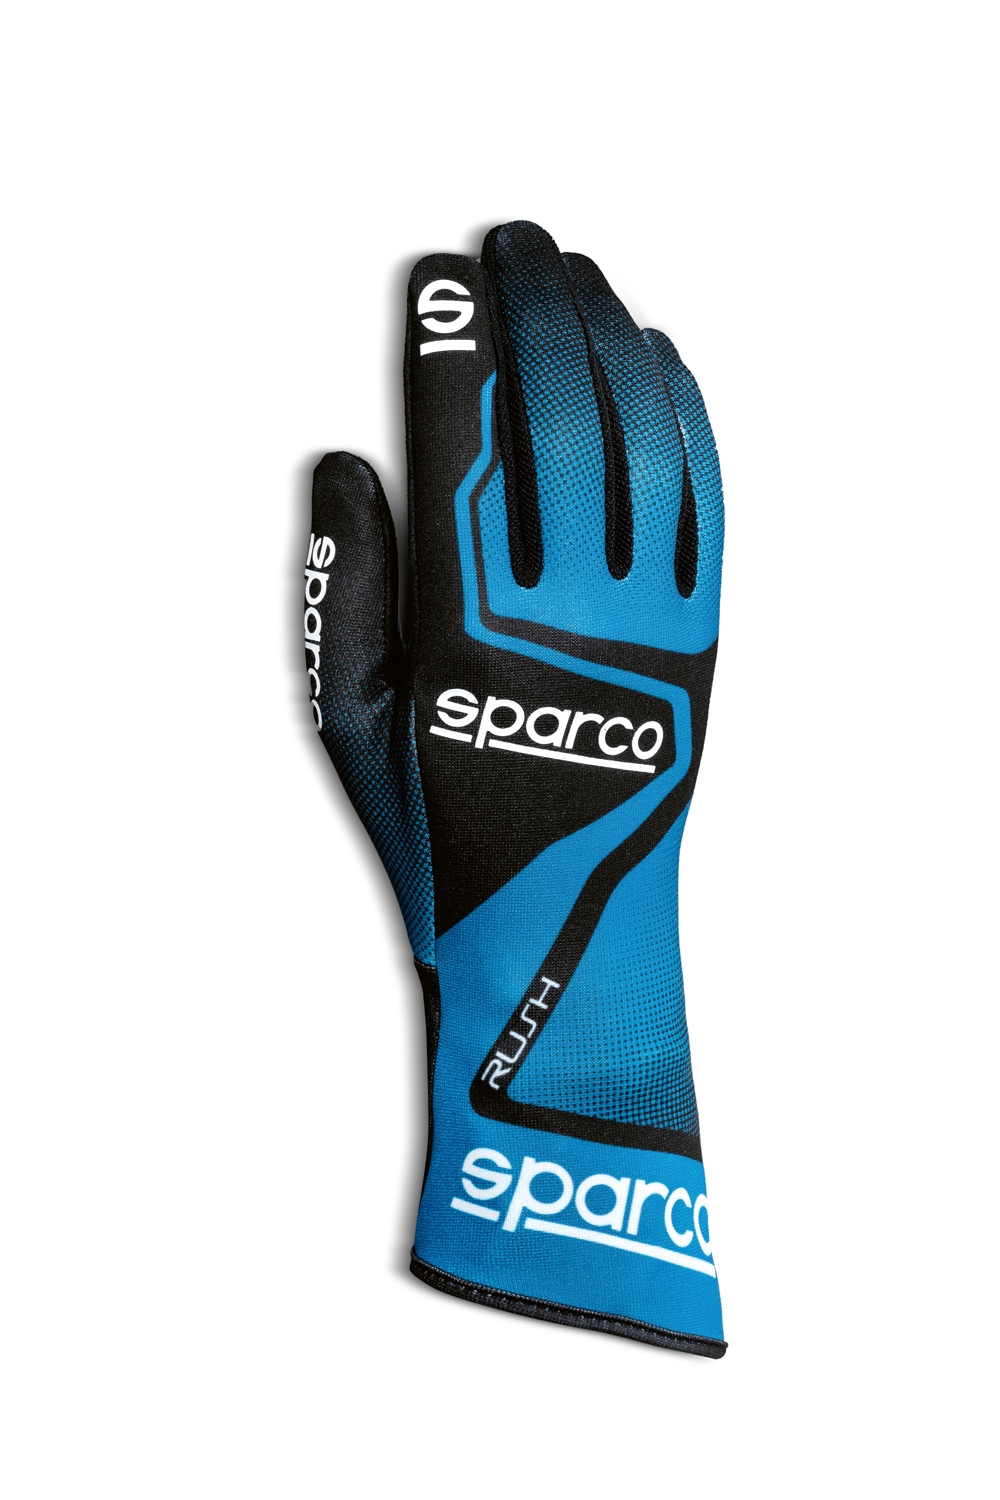 | Point Racing Karthandschuhe Sparco Rush